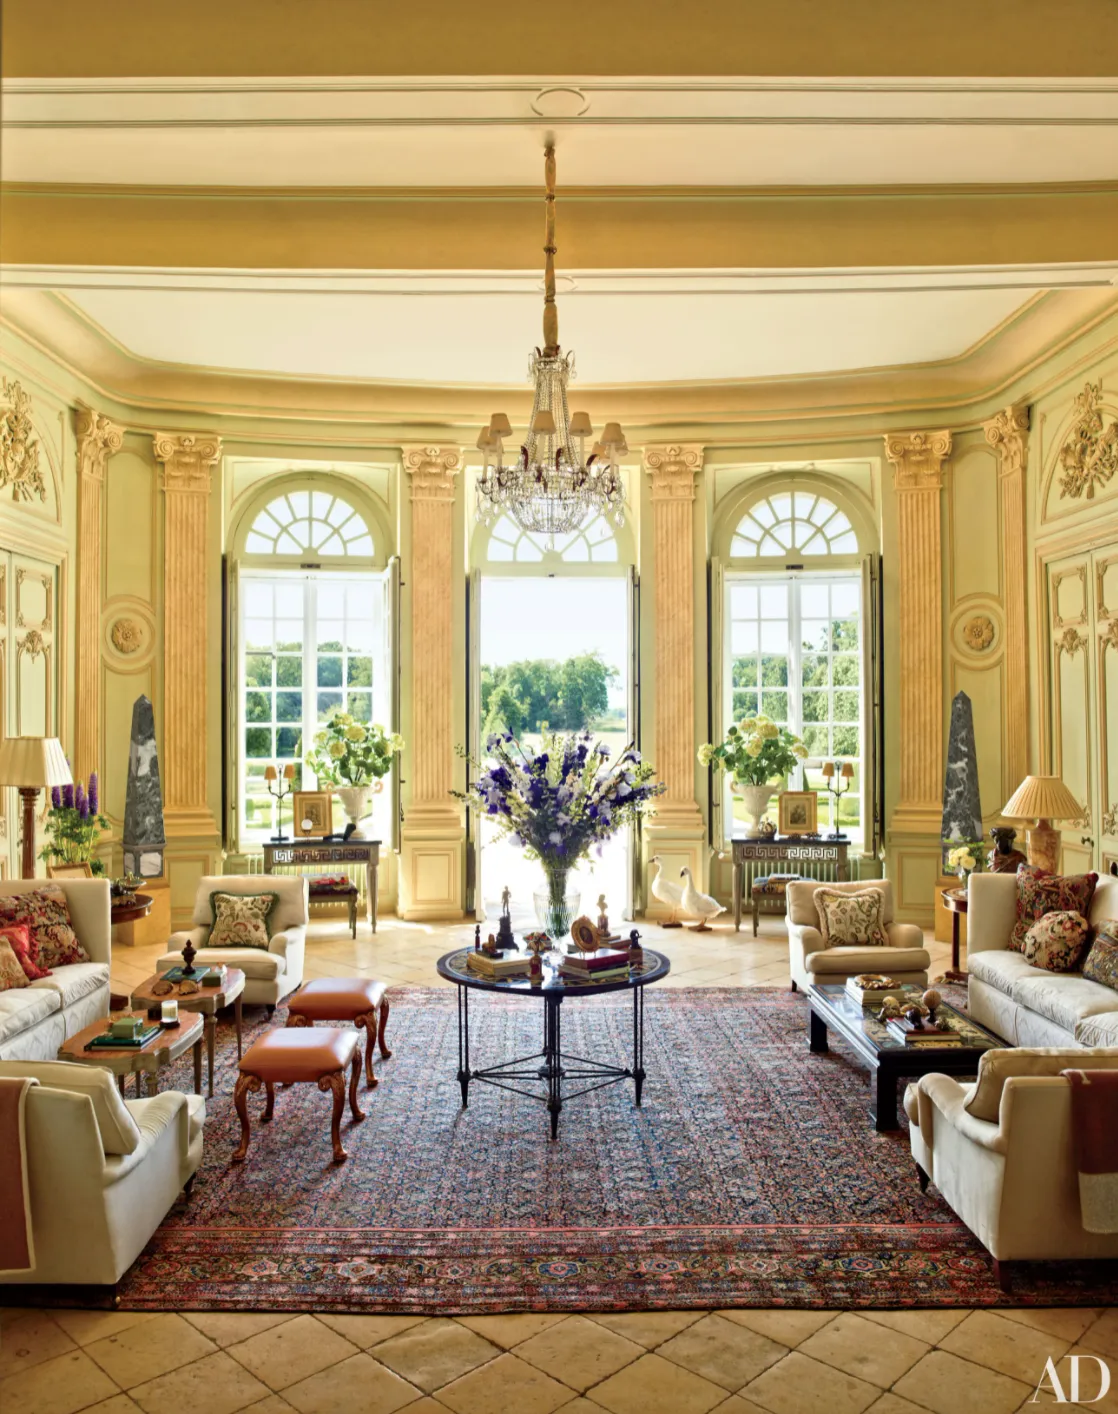 Photo: Eric Piasecki for Architectural Digest